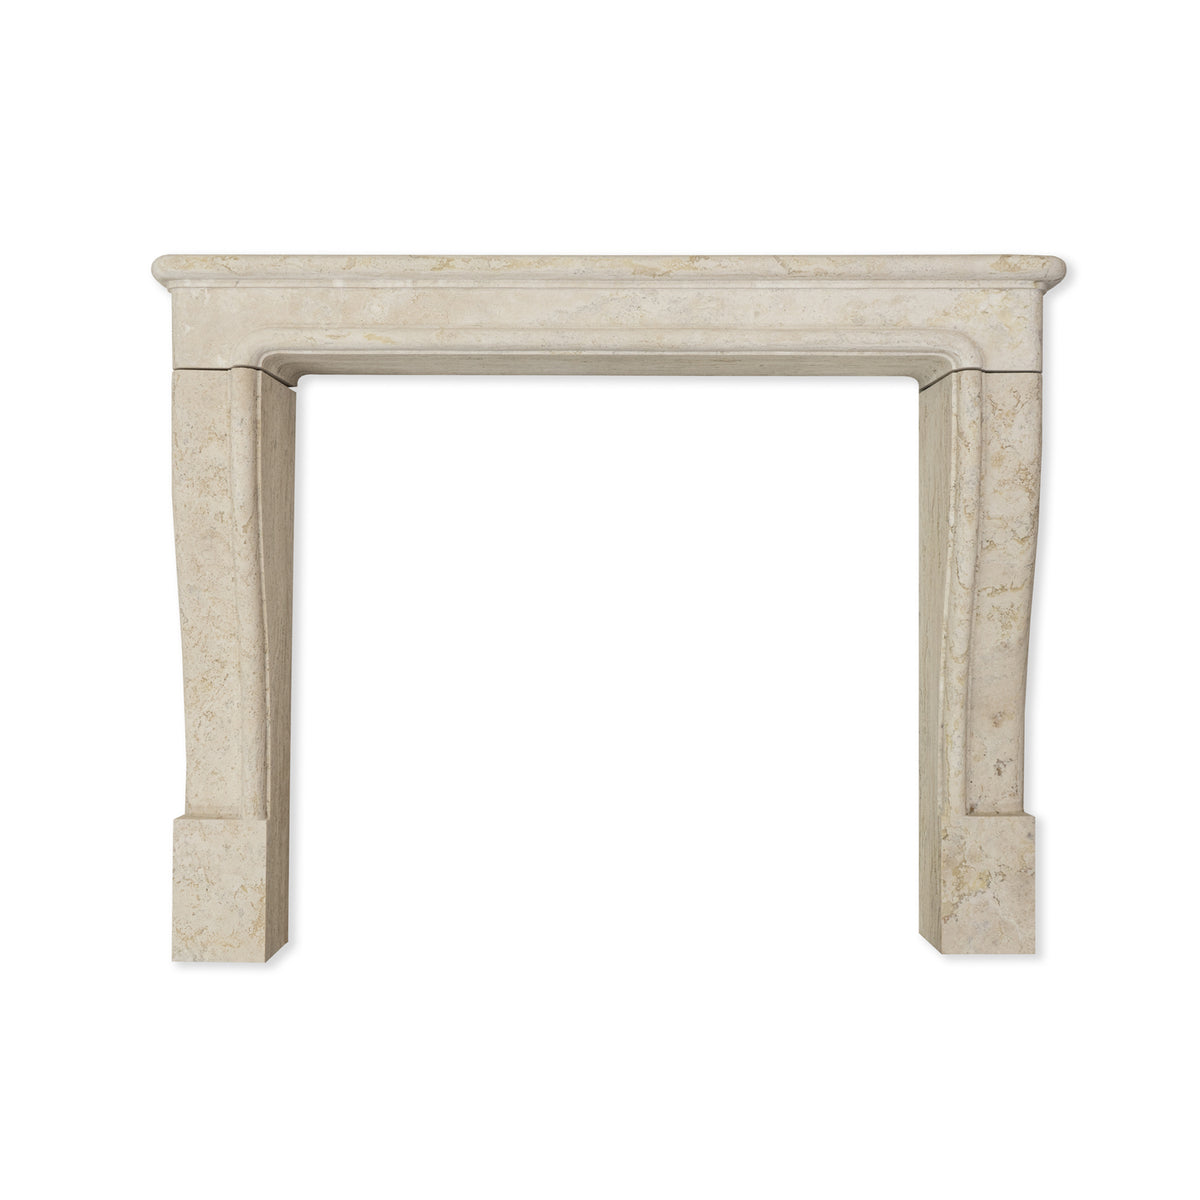 Hobson Fireplace in Maderno Travertine with Honed Finish view 3